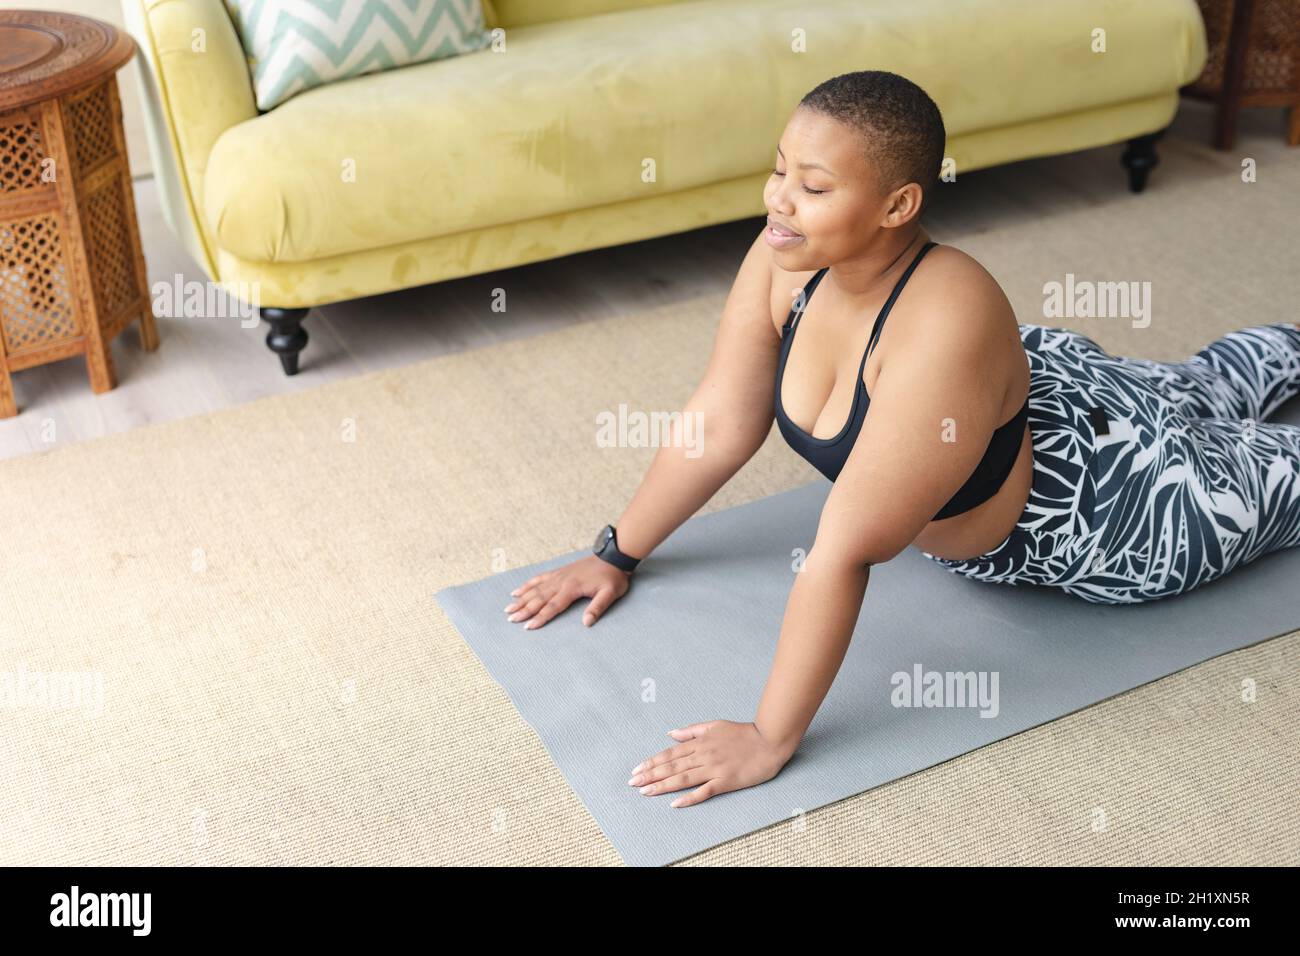 https://c8.alamy.com/comp/2H1XN5R/happy-african-american-plus-size-woman-practicing-yoga-on-mat-at-home-2H1XN5R.jpg